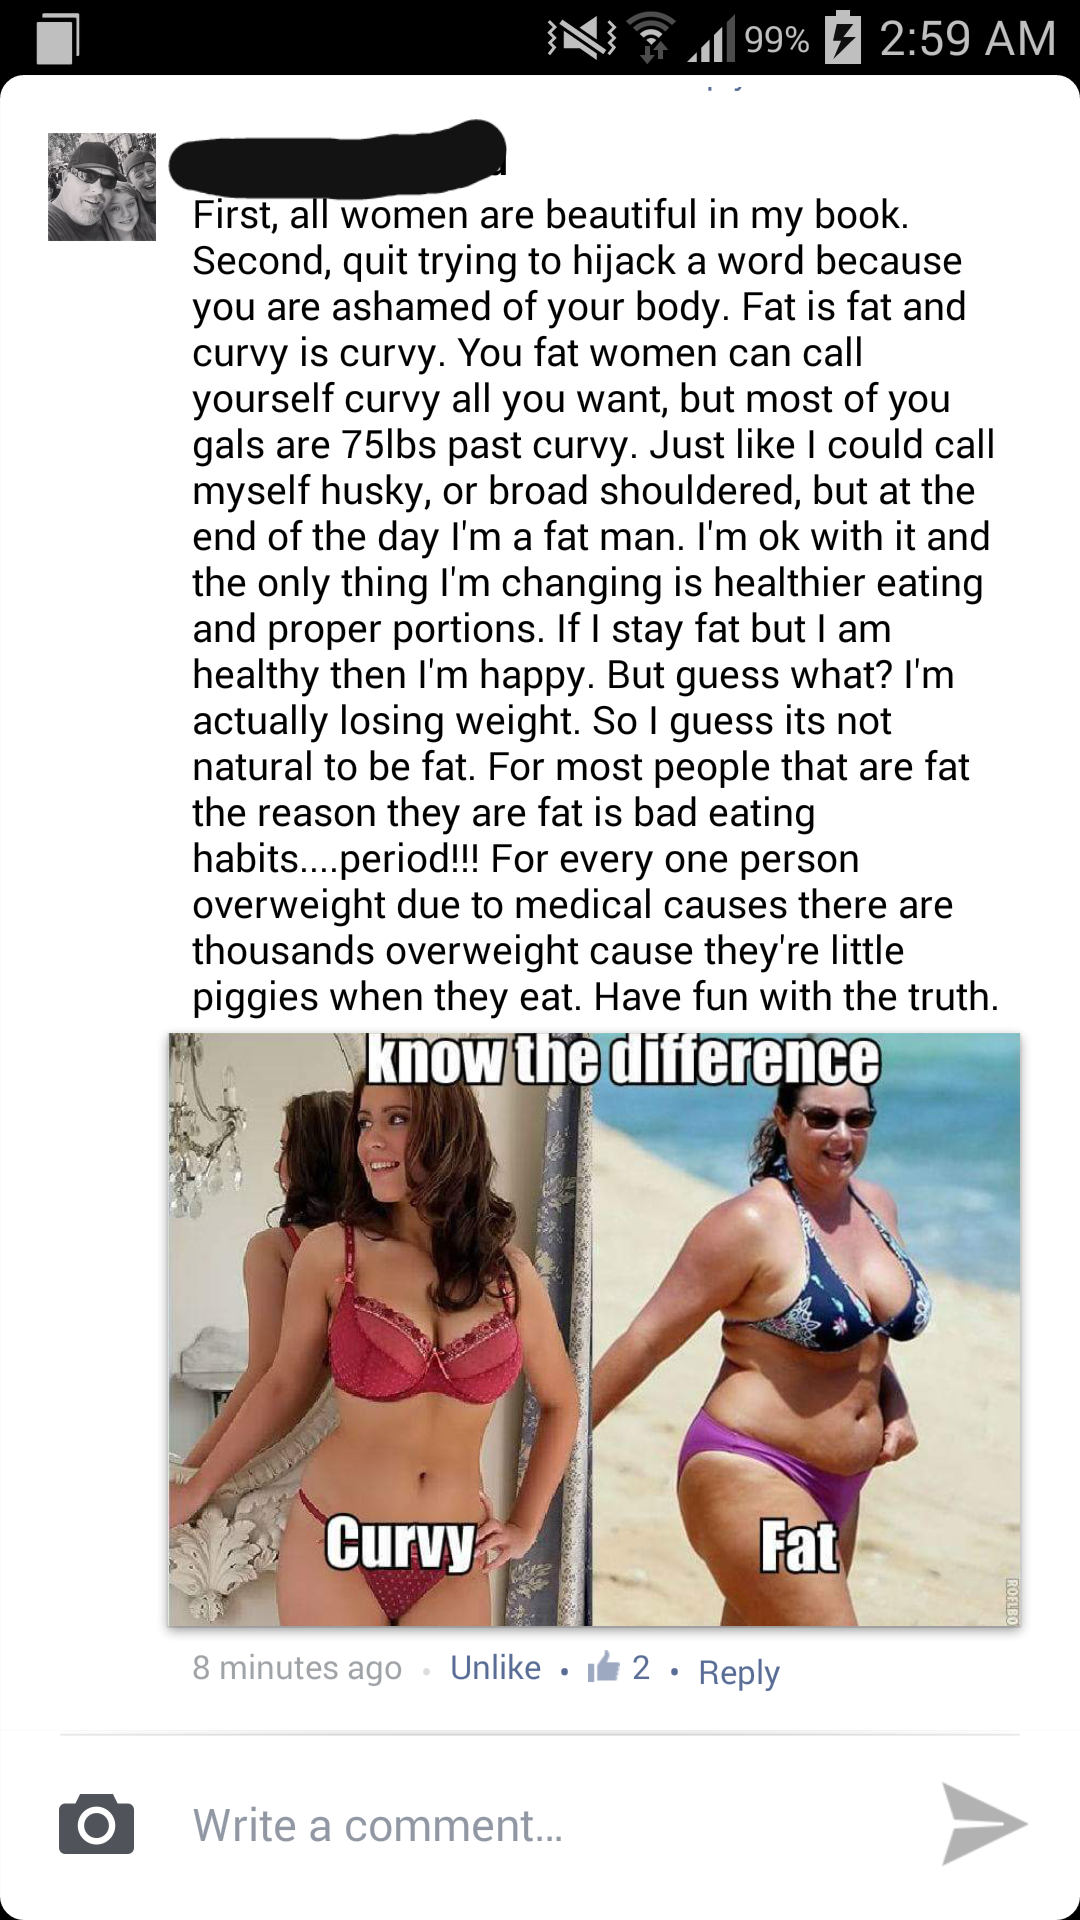 not fat but curvy - N 99% First, all women are beautiful in my book. Second, quit trying to hijack a word because you are ashamed of your body. Fat is fat and curvy is curvy. You fat women can call yourself curvy all you want, but most of you gals are 75l